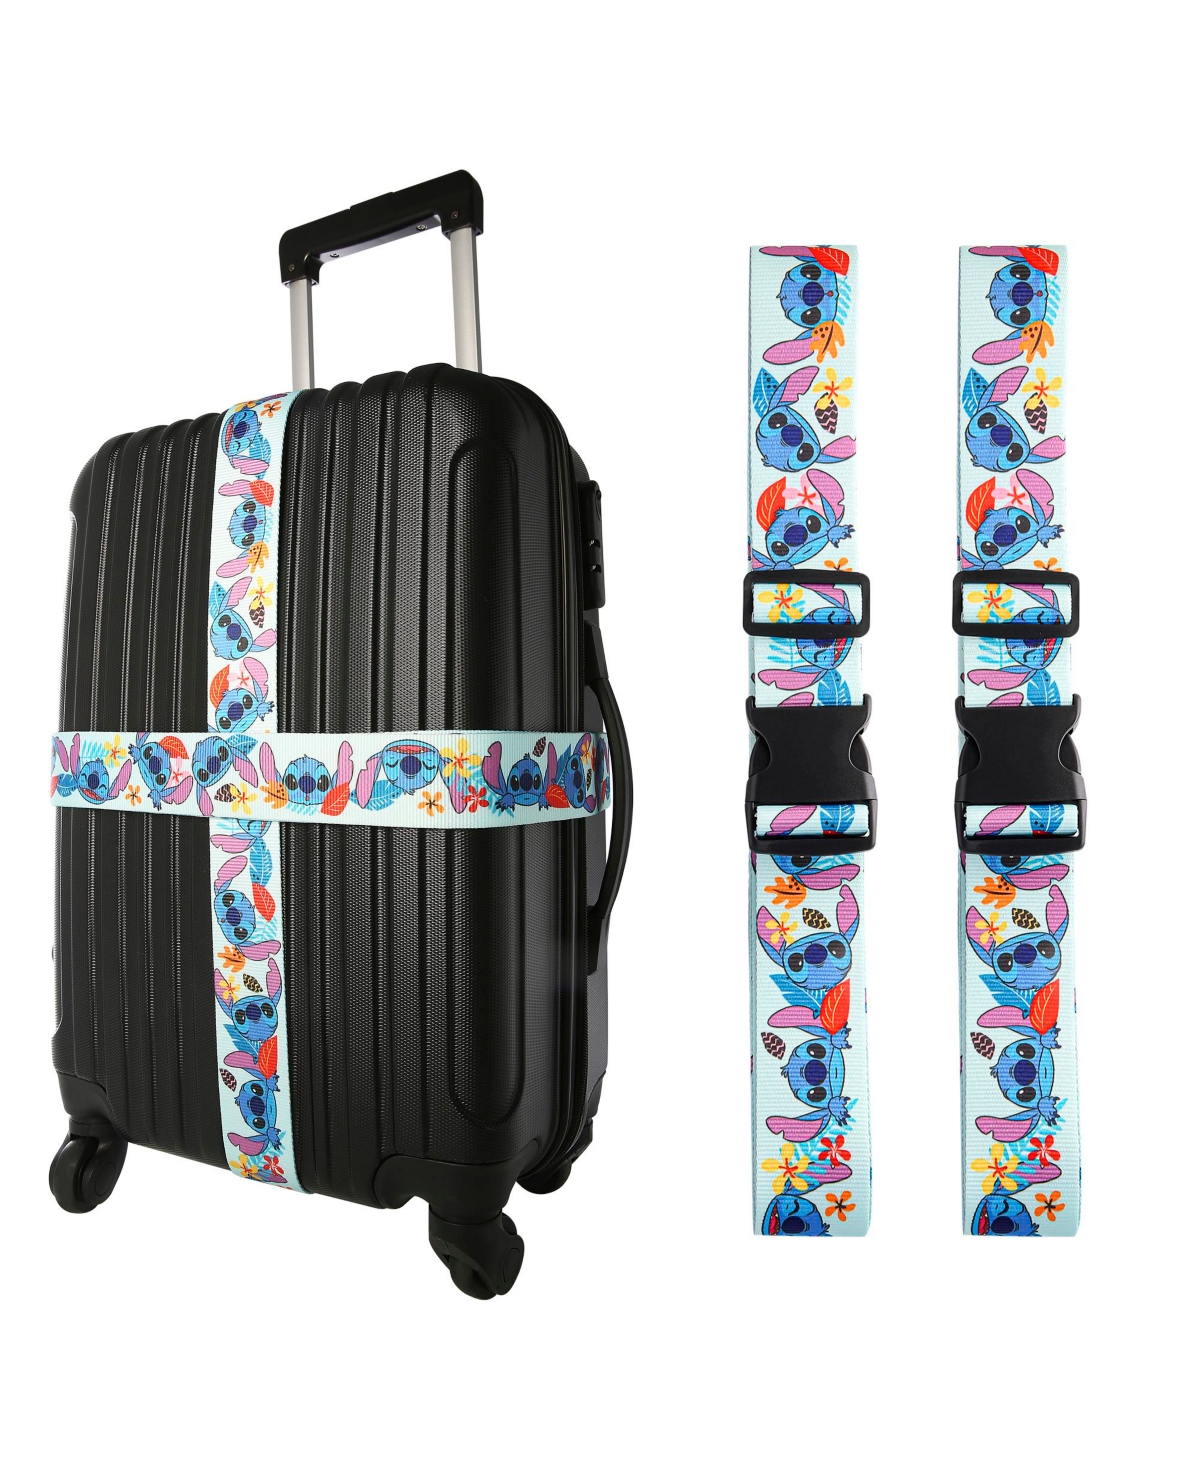 Stitch Luggage Strap 2-Piece Set Officially Licensed, Adjustable Luggage Straps from 30'' to 72'' - Blue, white